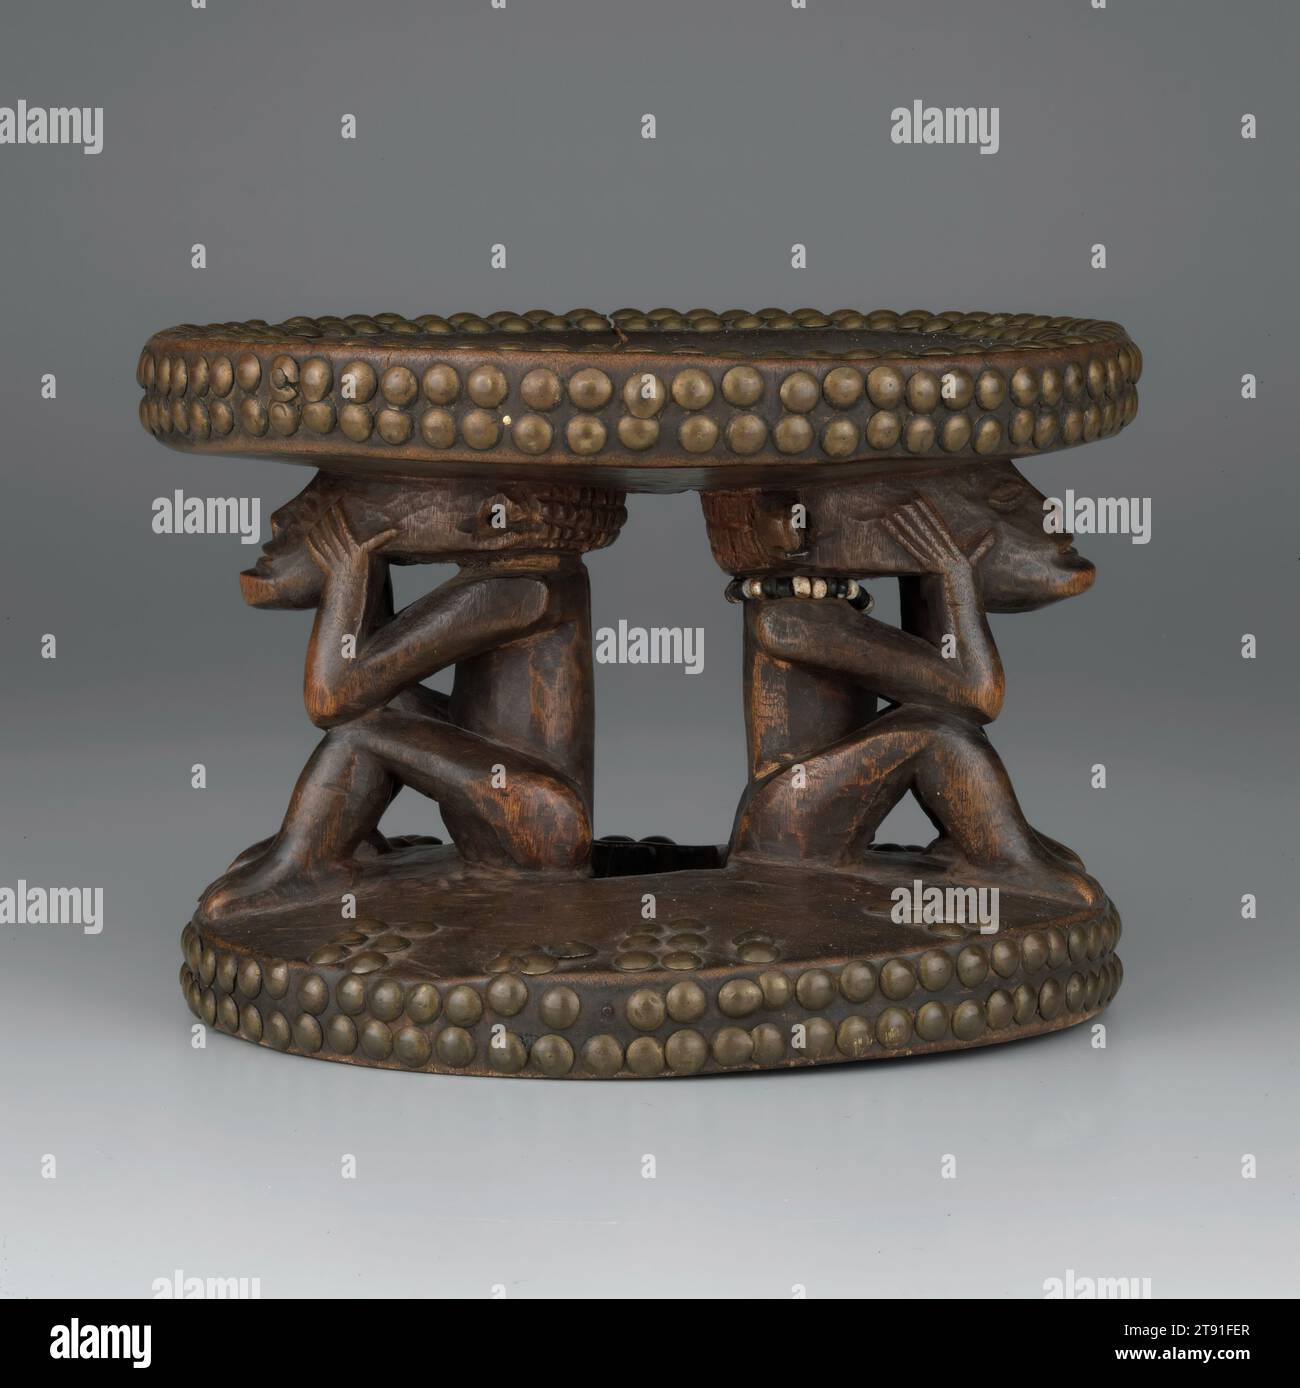 Stool, 19th-20th century, 5-11/16 x 8-1/8 x 7-13/16 in. (14.4 x 20.6 x 19.8 cm), Wood, brass tacks, beads, Democratic Republic of the Congo, 19th-20th century, Many African cultures, including the Chokwe, believe death is not an end, but merely a transition to the spirit world. Departed ancestors continue to play an active role in the life of the living, providing protection and guidance. The living try to ensure the good favor of their ancestors by respecting traditions and providing offerings of food and drink. The figure in these Chokwe stools is an ancestor holding her head in sorrow. Stock Photo